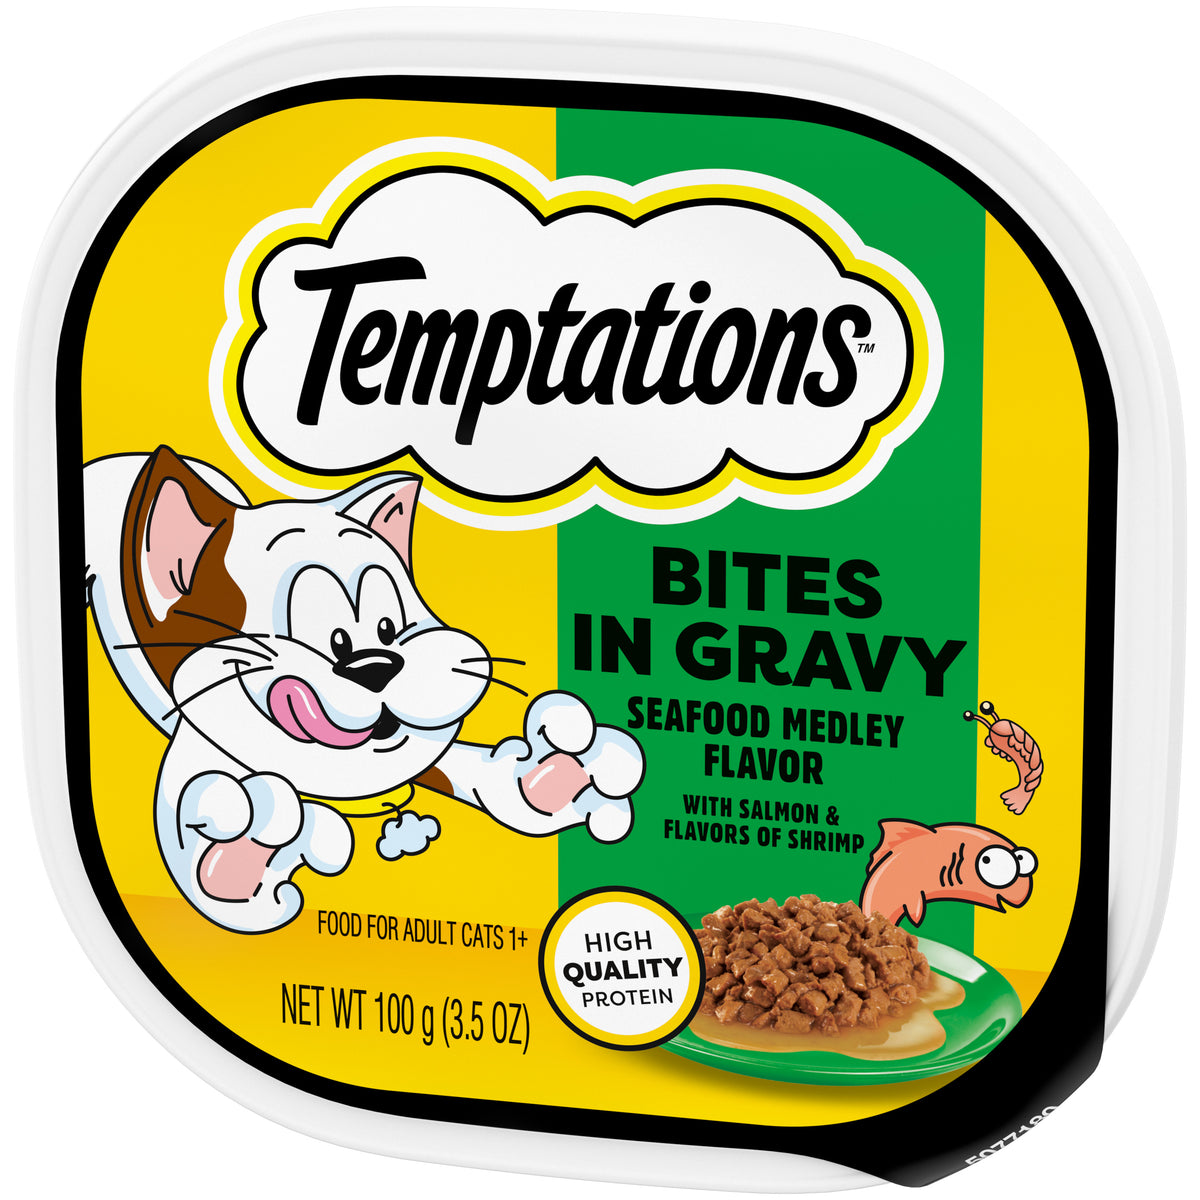 [Temptations][Temptations Wet Cat Food, Seafood Medley Flavor Bites in Gravy, 3.5 oz. Tray][Image Center Right (3/4 Angle)]